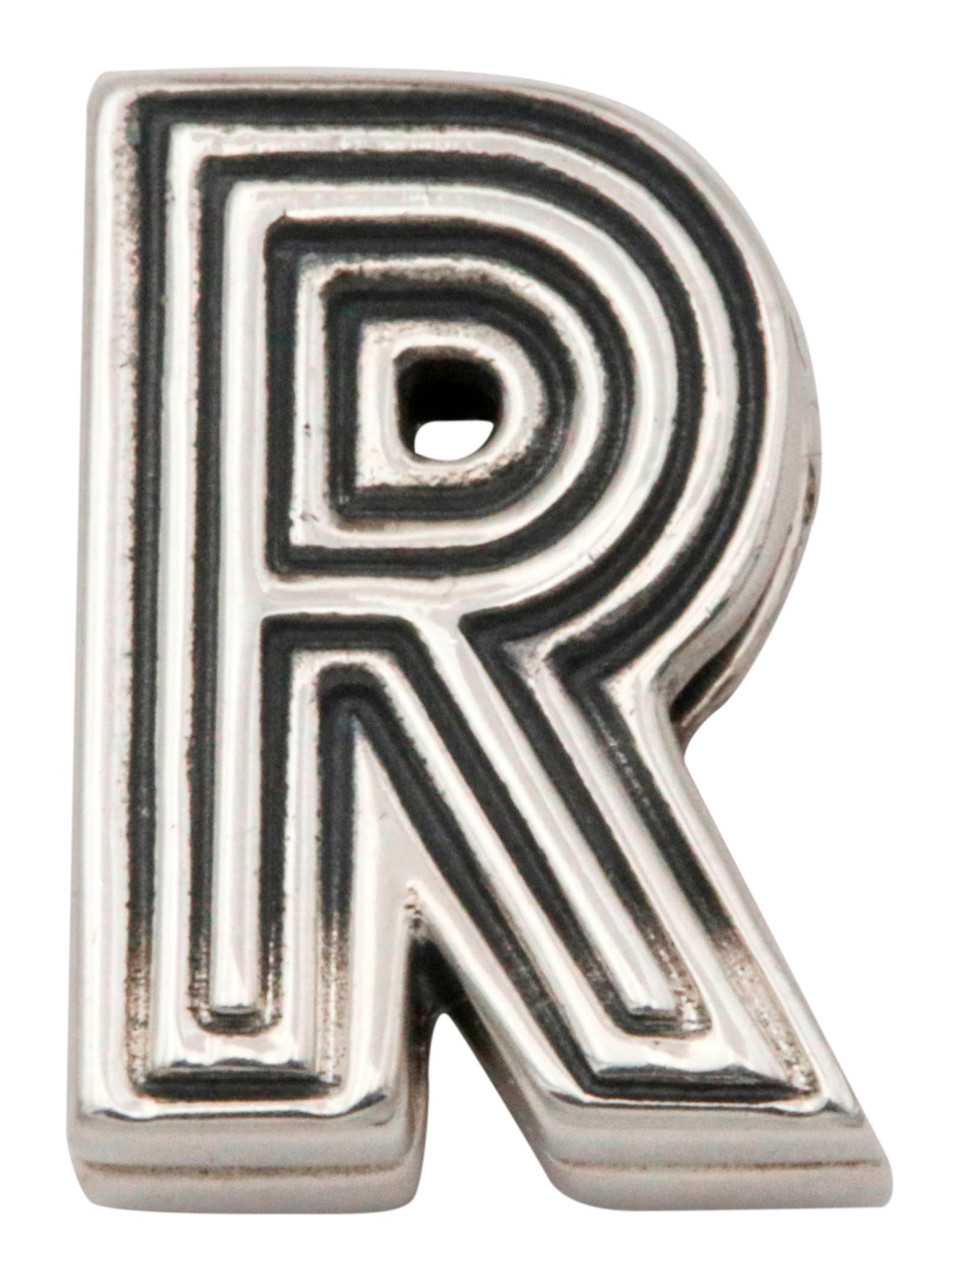 Charm with letter R in silver with stones